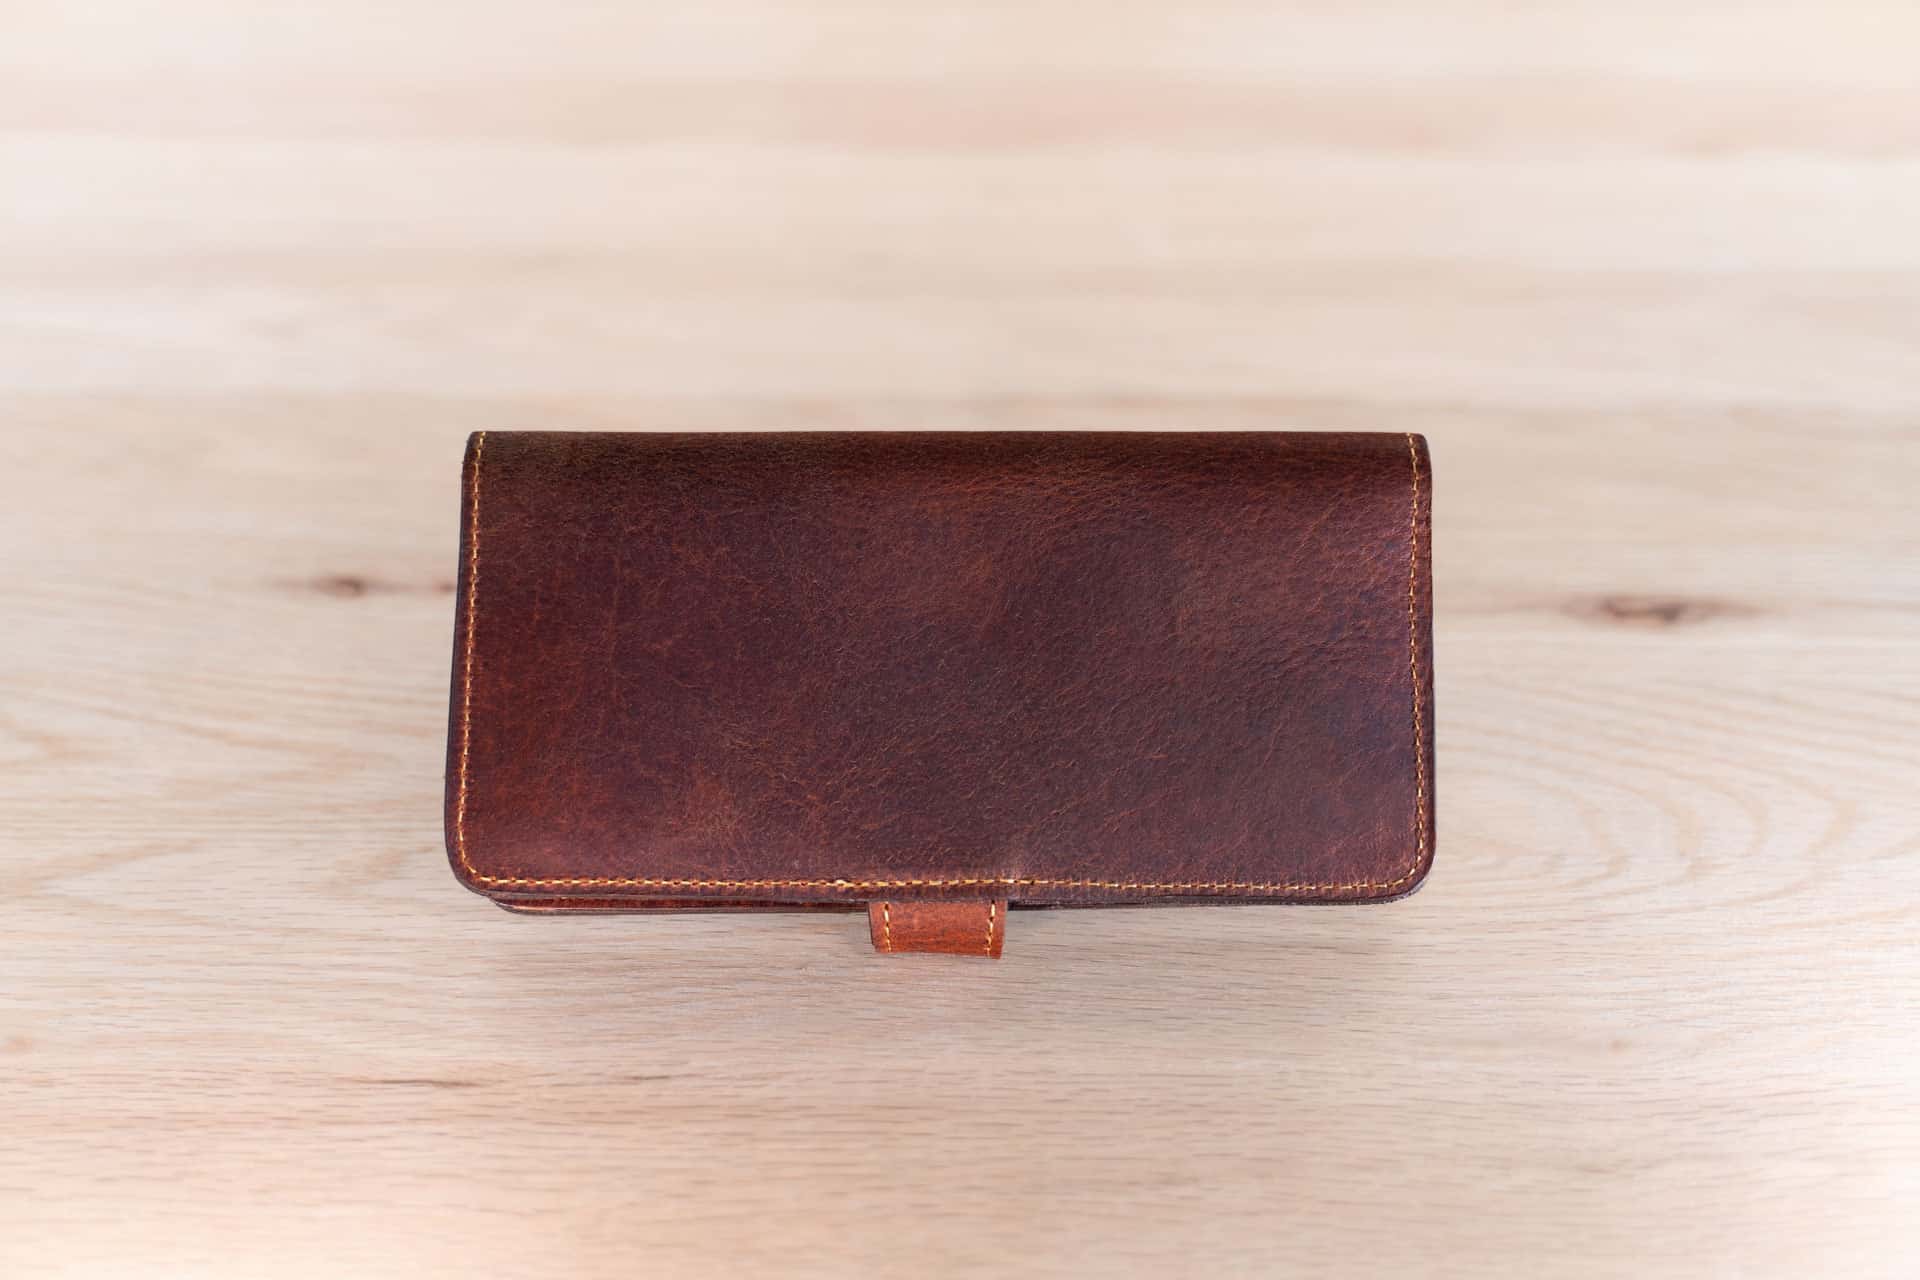  Card Holder, Minimalist Wallet for Women, Covered snap